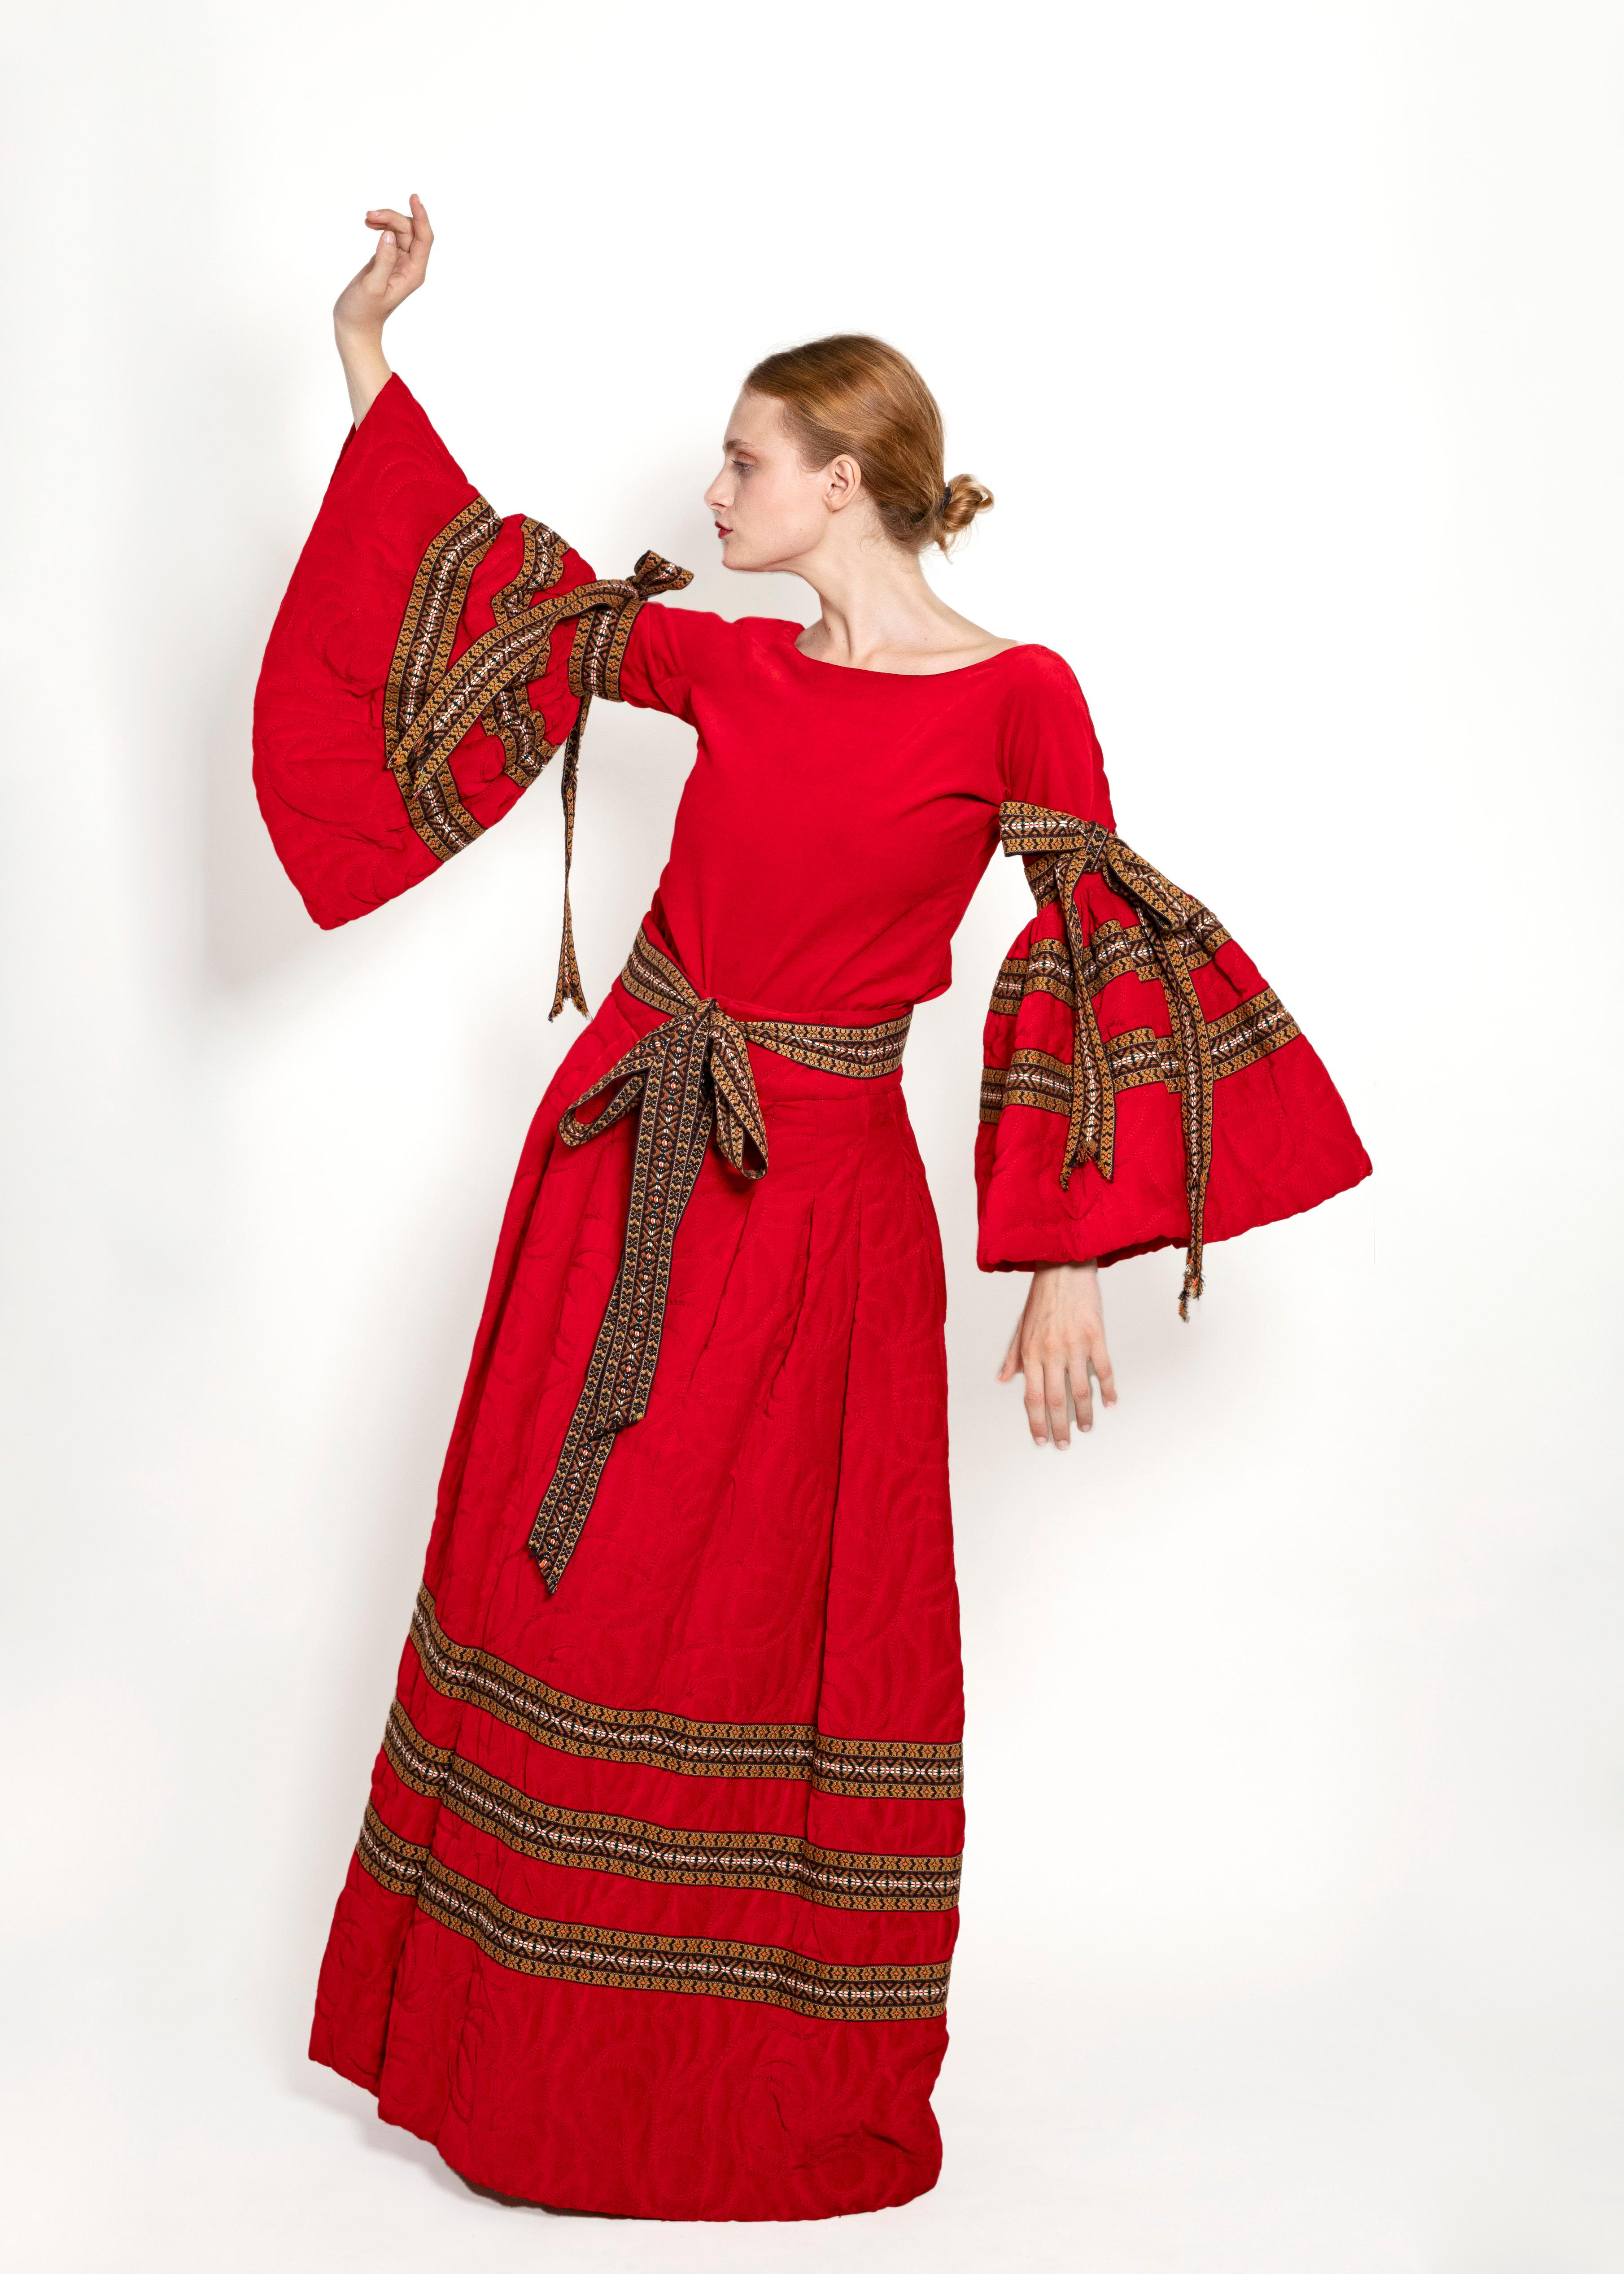 Worn by Aretha Franklin for her Spanish Harlem album cover in 1971, this iconic Adolfo Skirt ensemble is intricately designed with ruby-red embroidered velvet with colorful ribbon trim. The bell sleeved top has colorful ribbon arm ties, and the